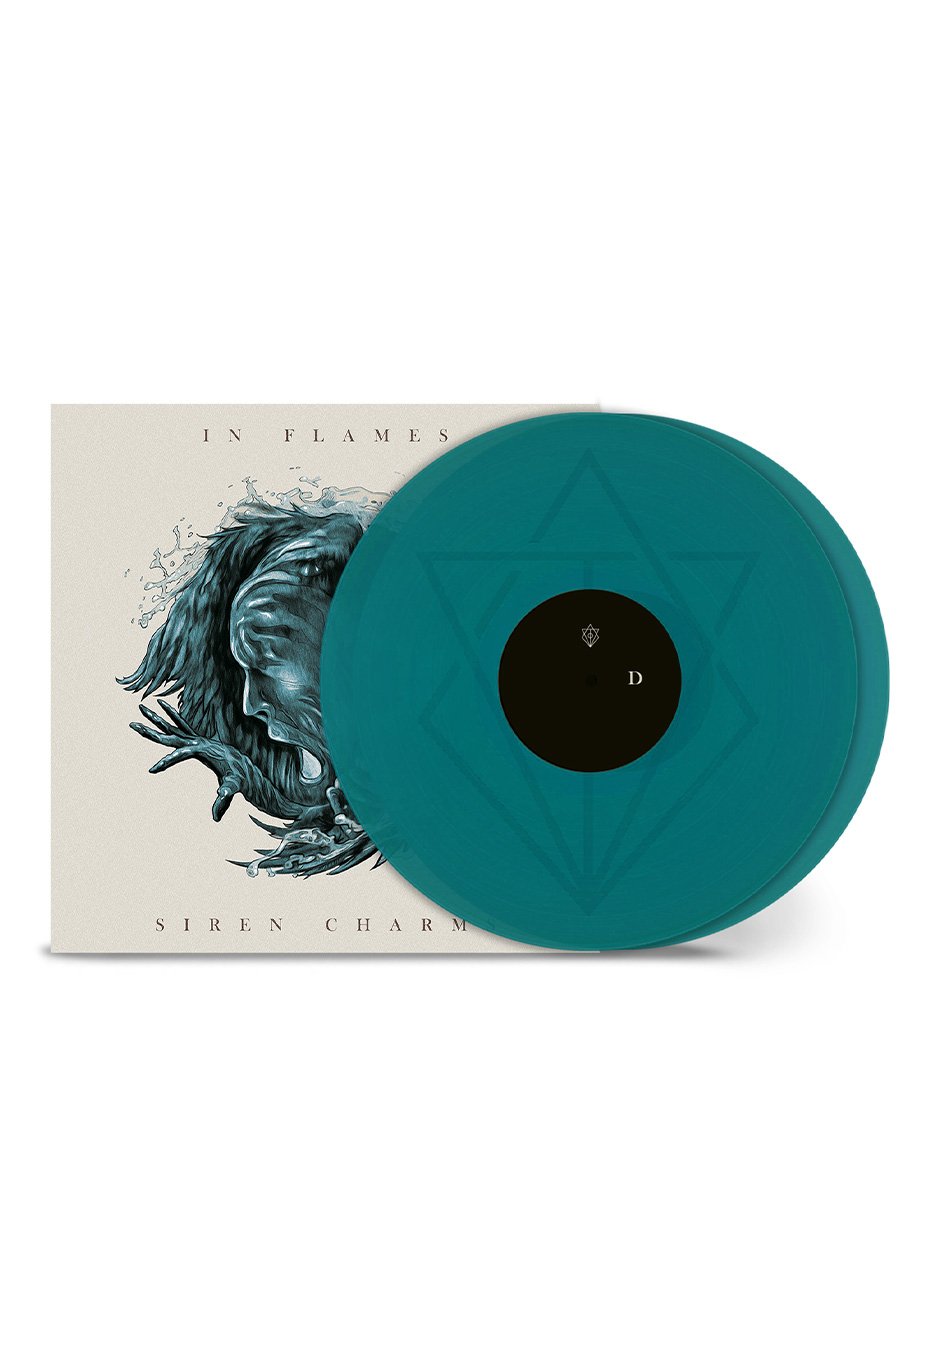 In Flames - Siren Charms (10th Anniversary) Transparent Green - Colored 2 Vinyl